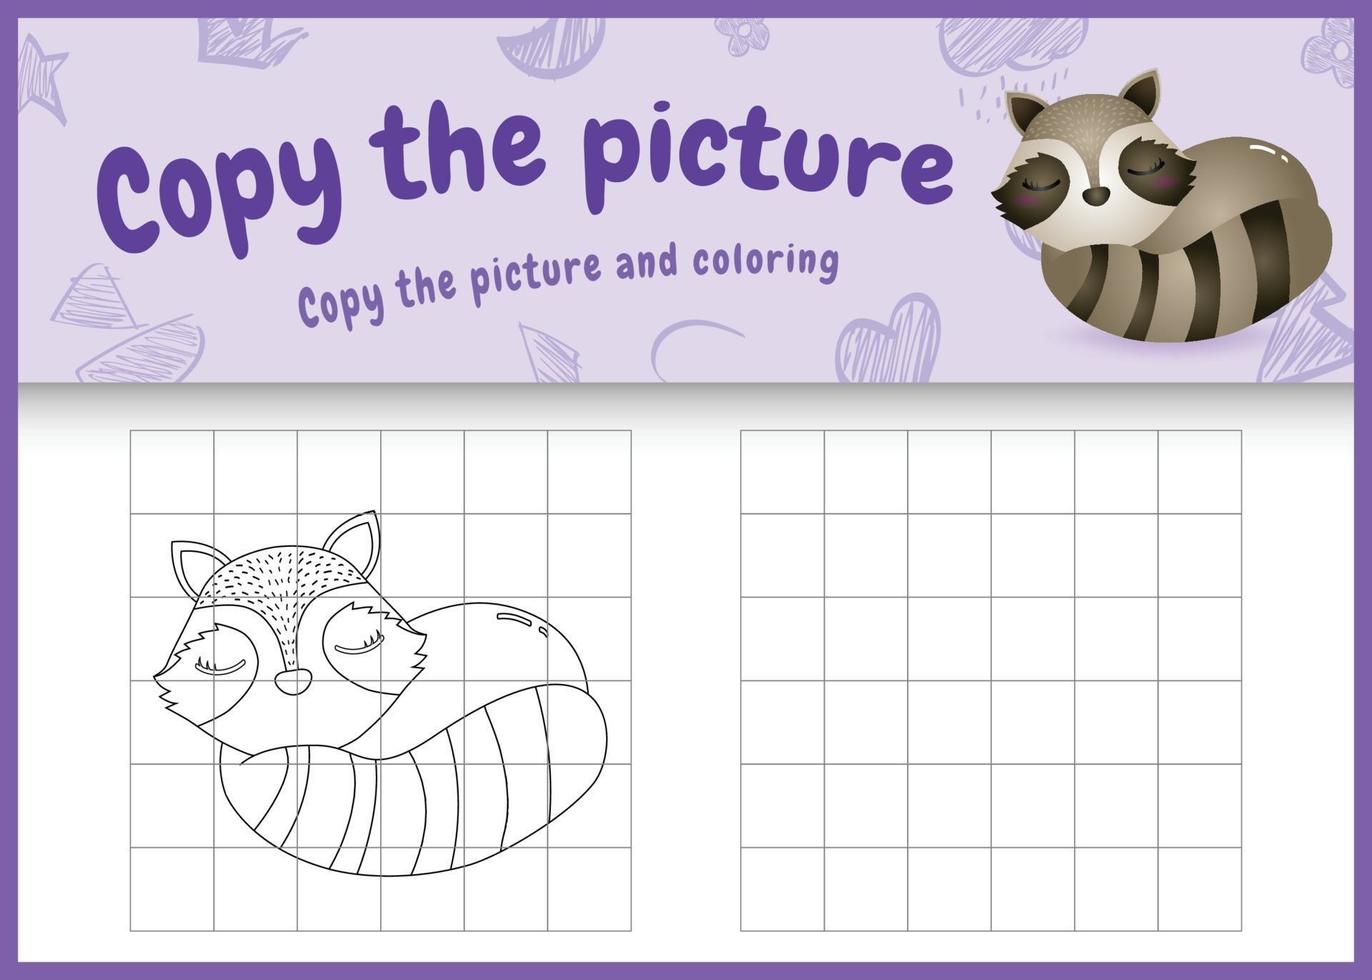 copy the picture kids game and coloring page with a cute raccoon character illustration vector